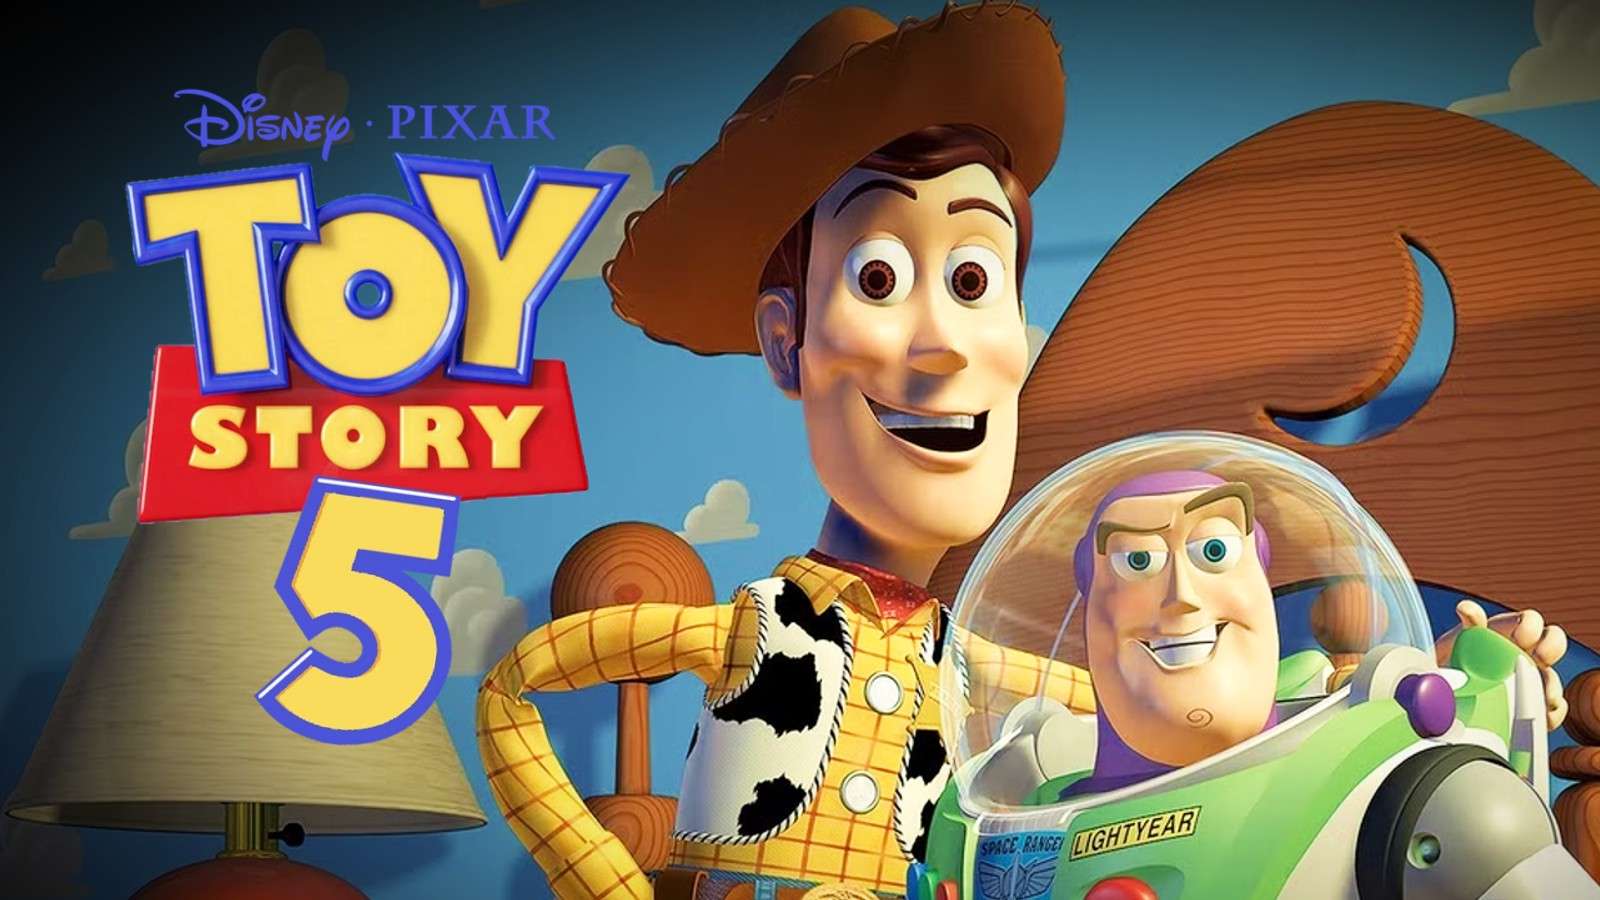 Woody and Buzz and a logo for Toy Story 5